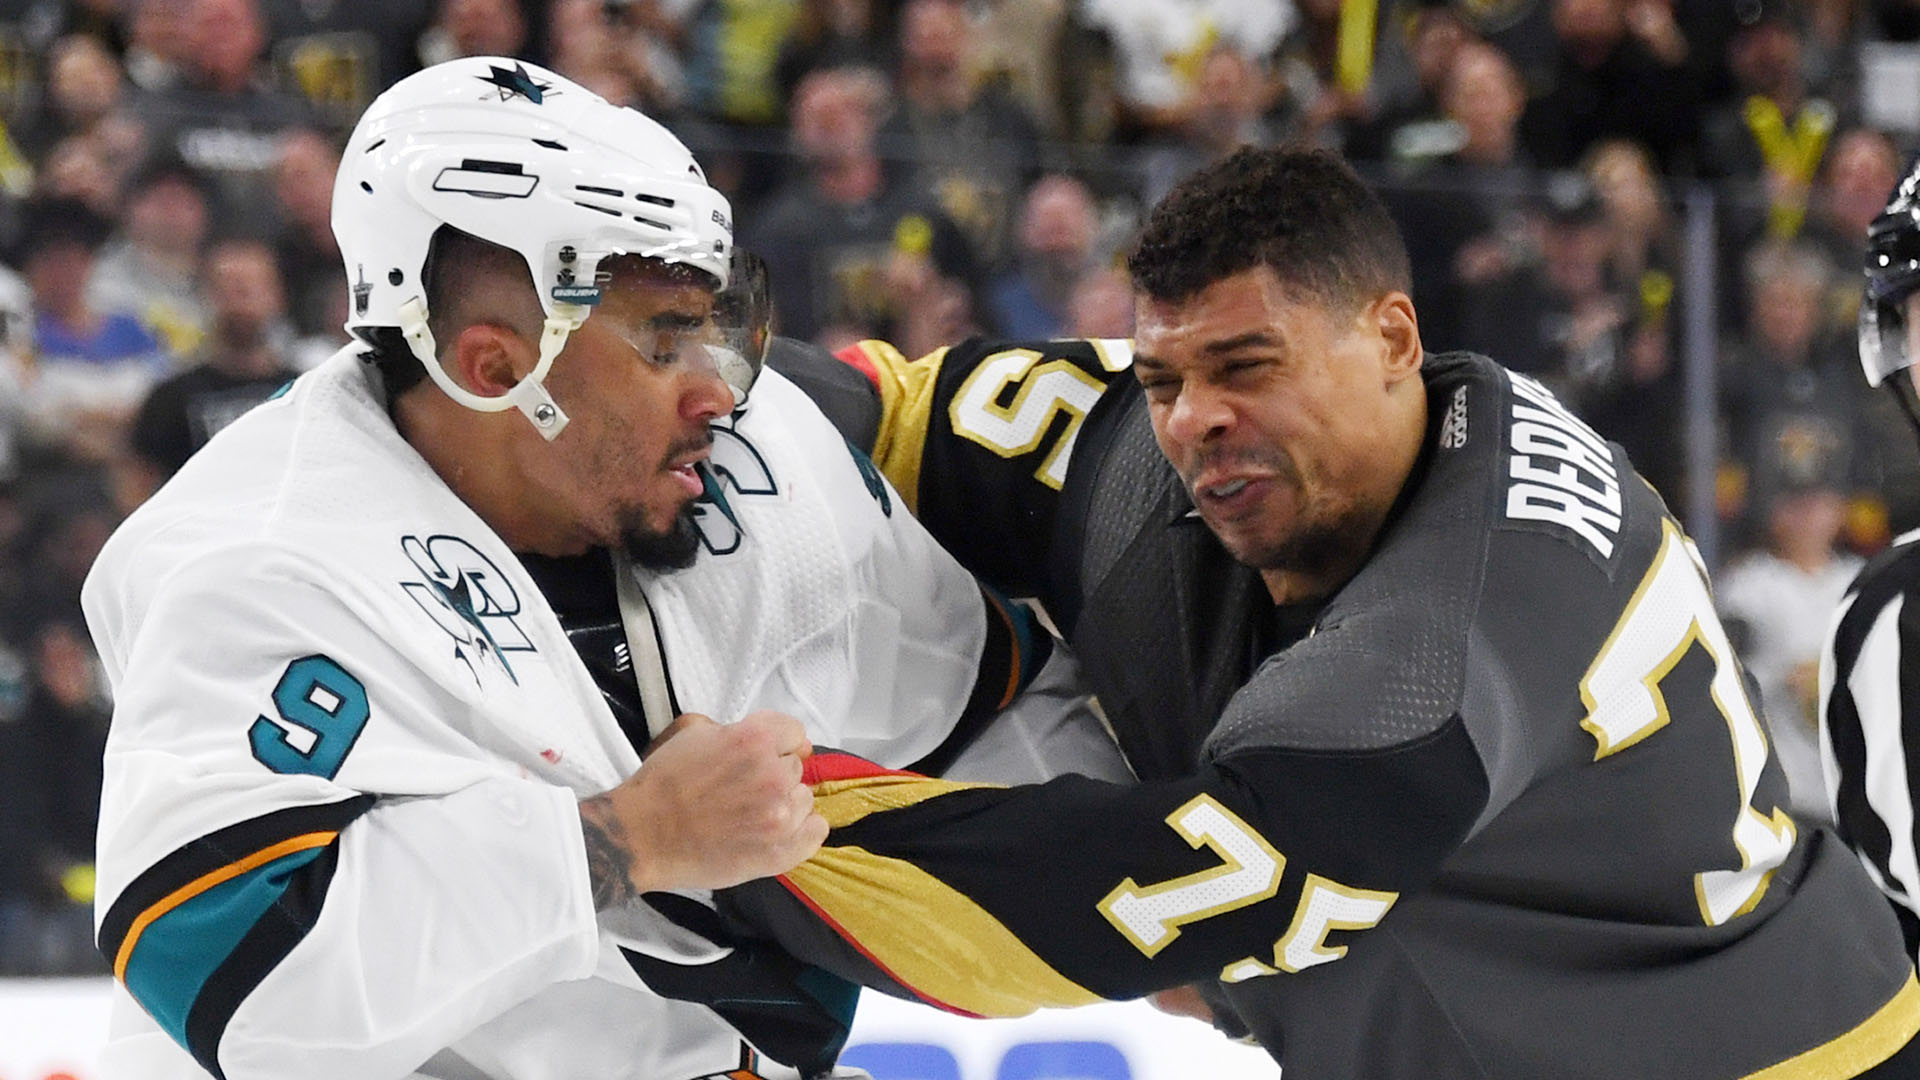 Evander Kane compares Ryan Reaves to the 'Muffin Man' Sporting News